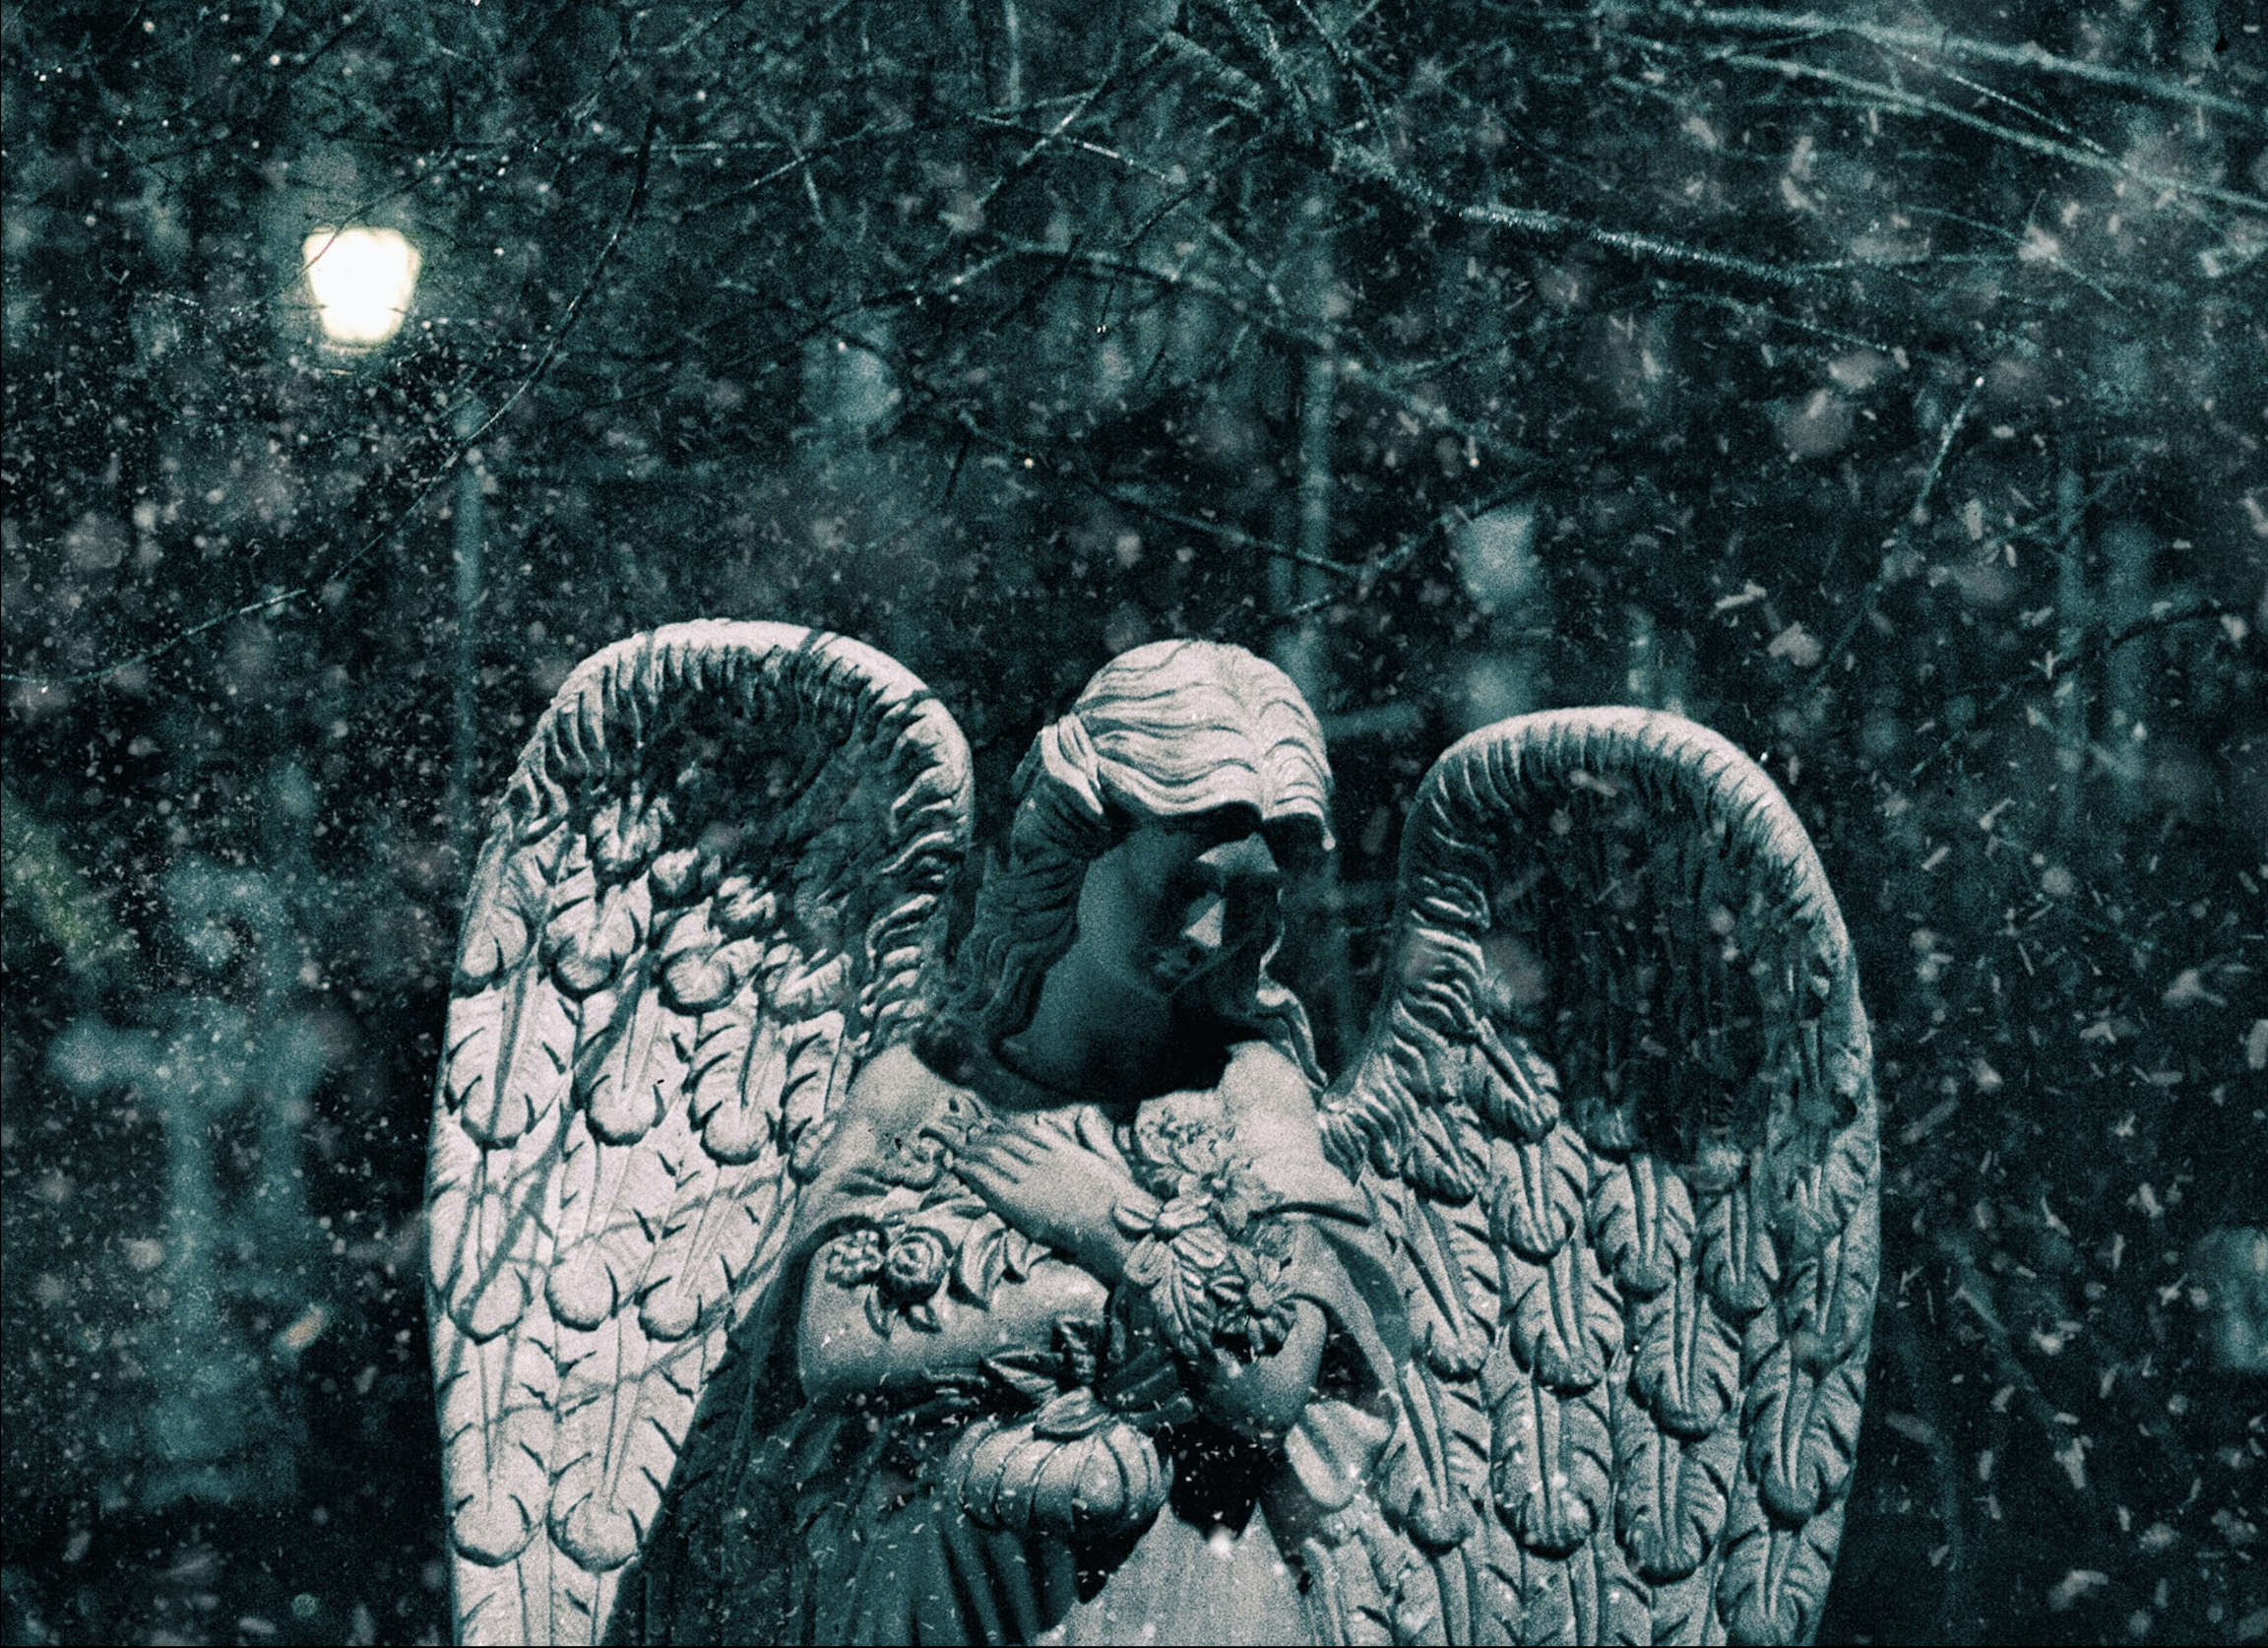 People don't become angels when they die. But that doesn't mean